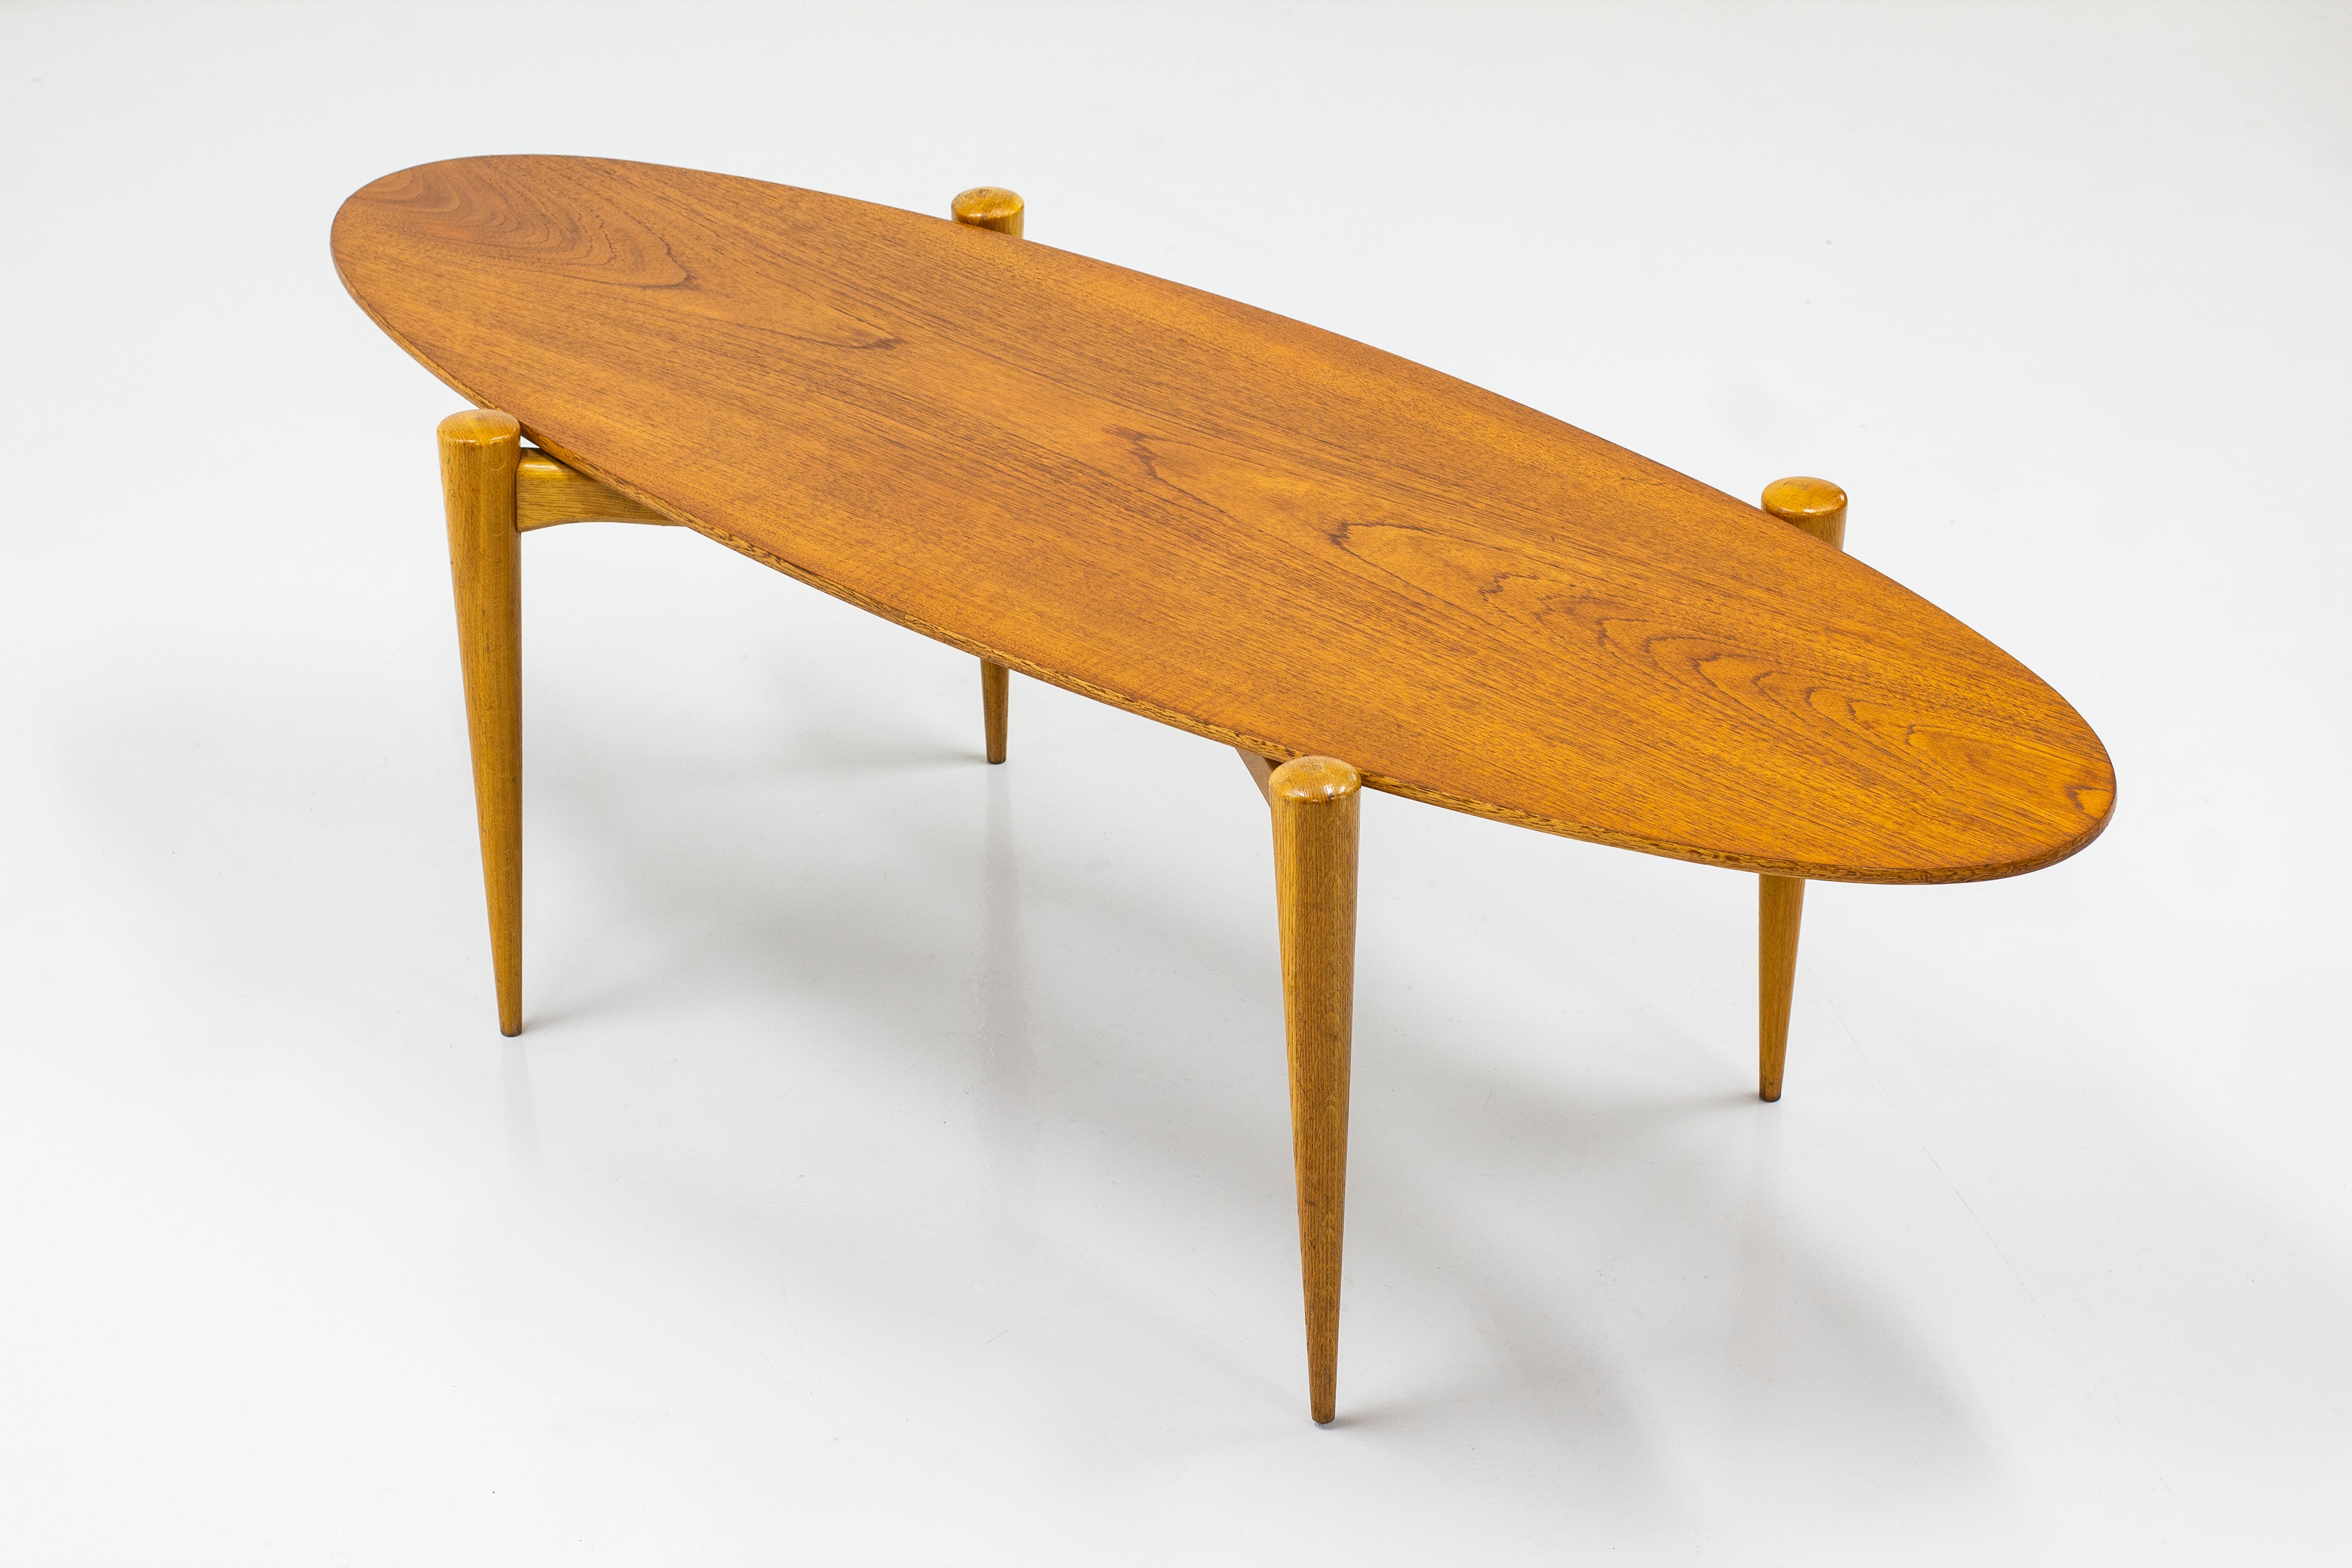 Surfboard coffee table made in Sweden